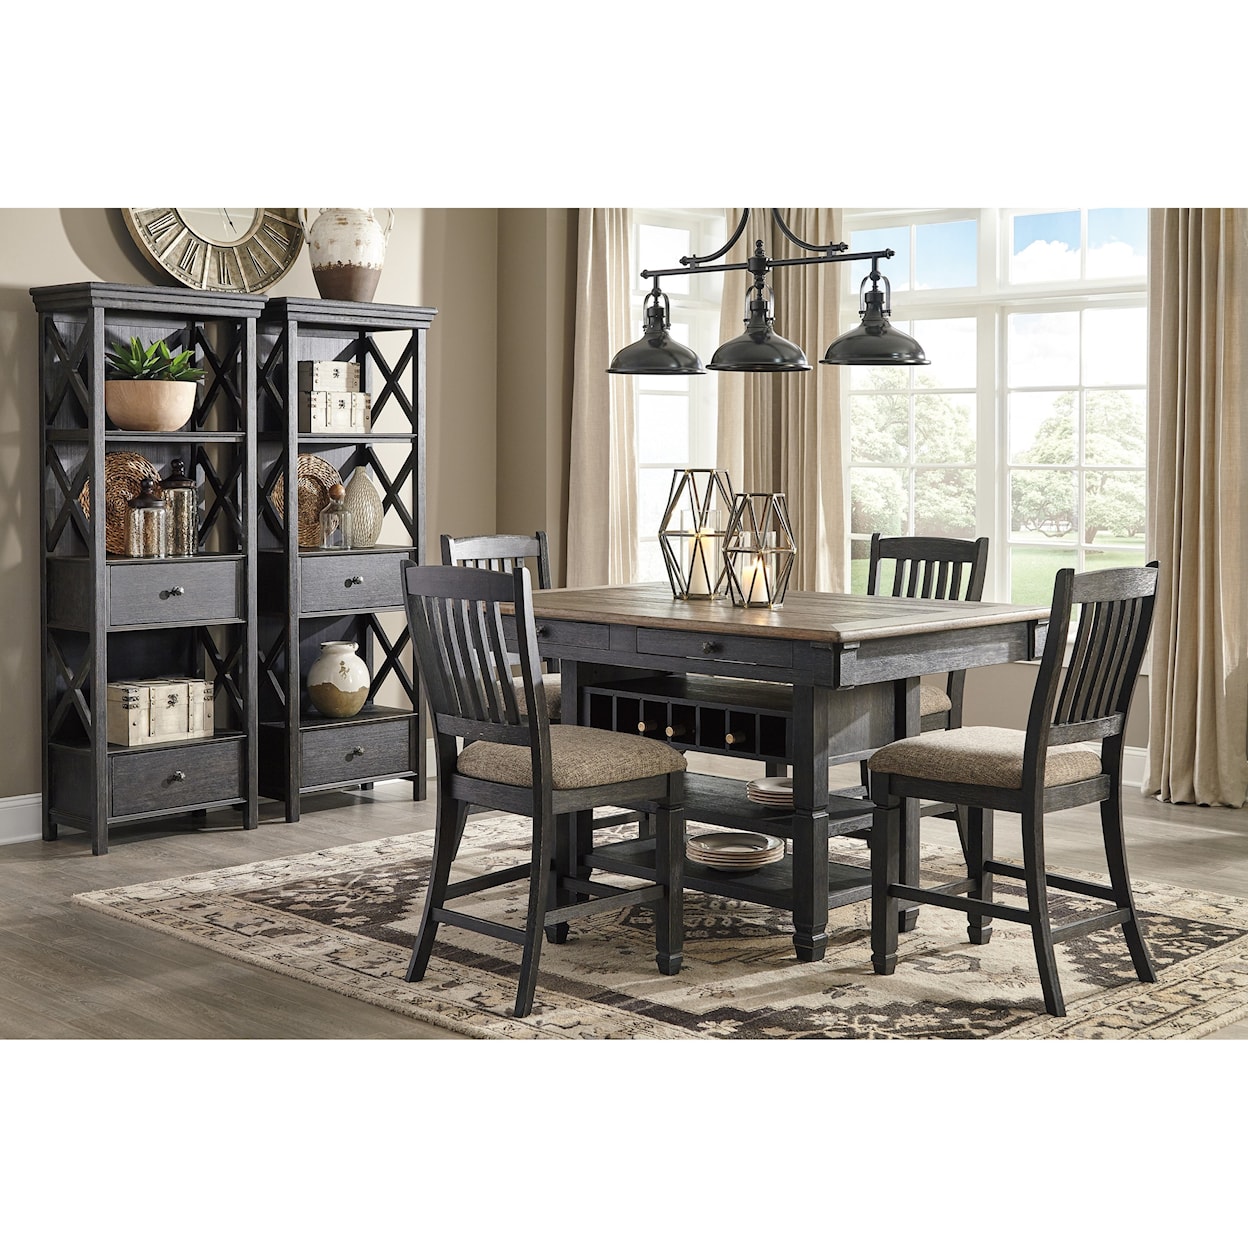 Signature Design by Ashley Tyler Creek Casual Dining Room Group